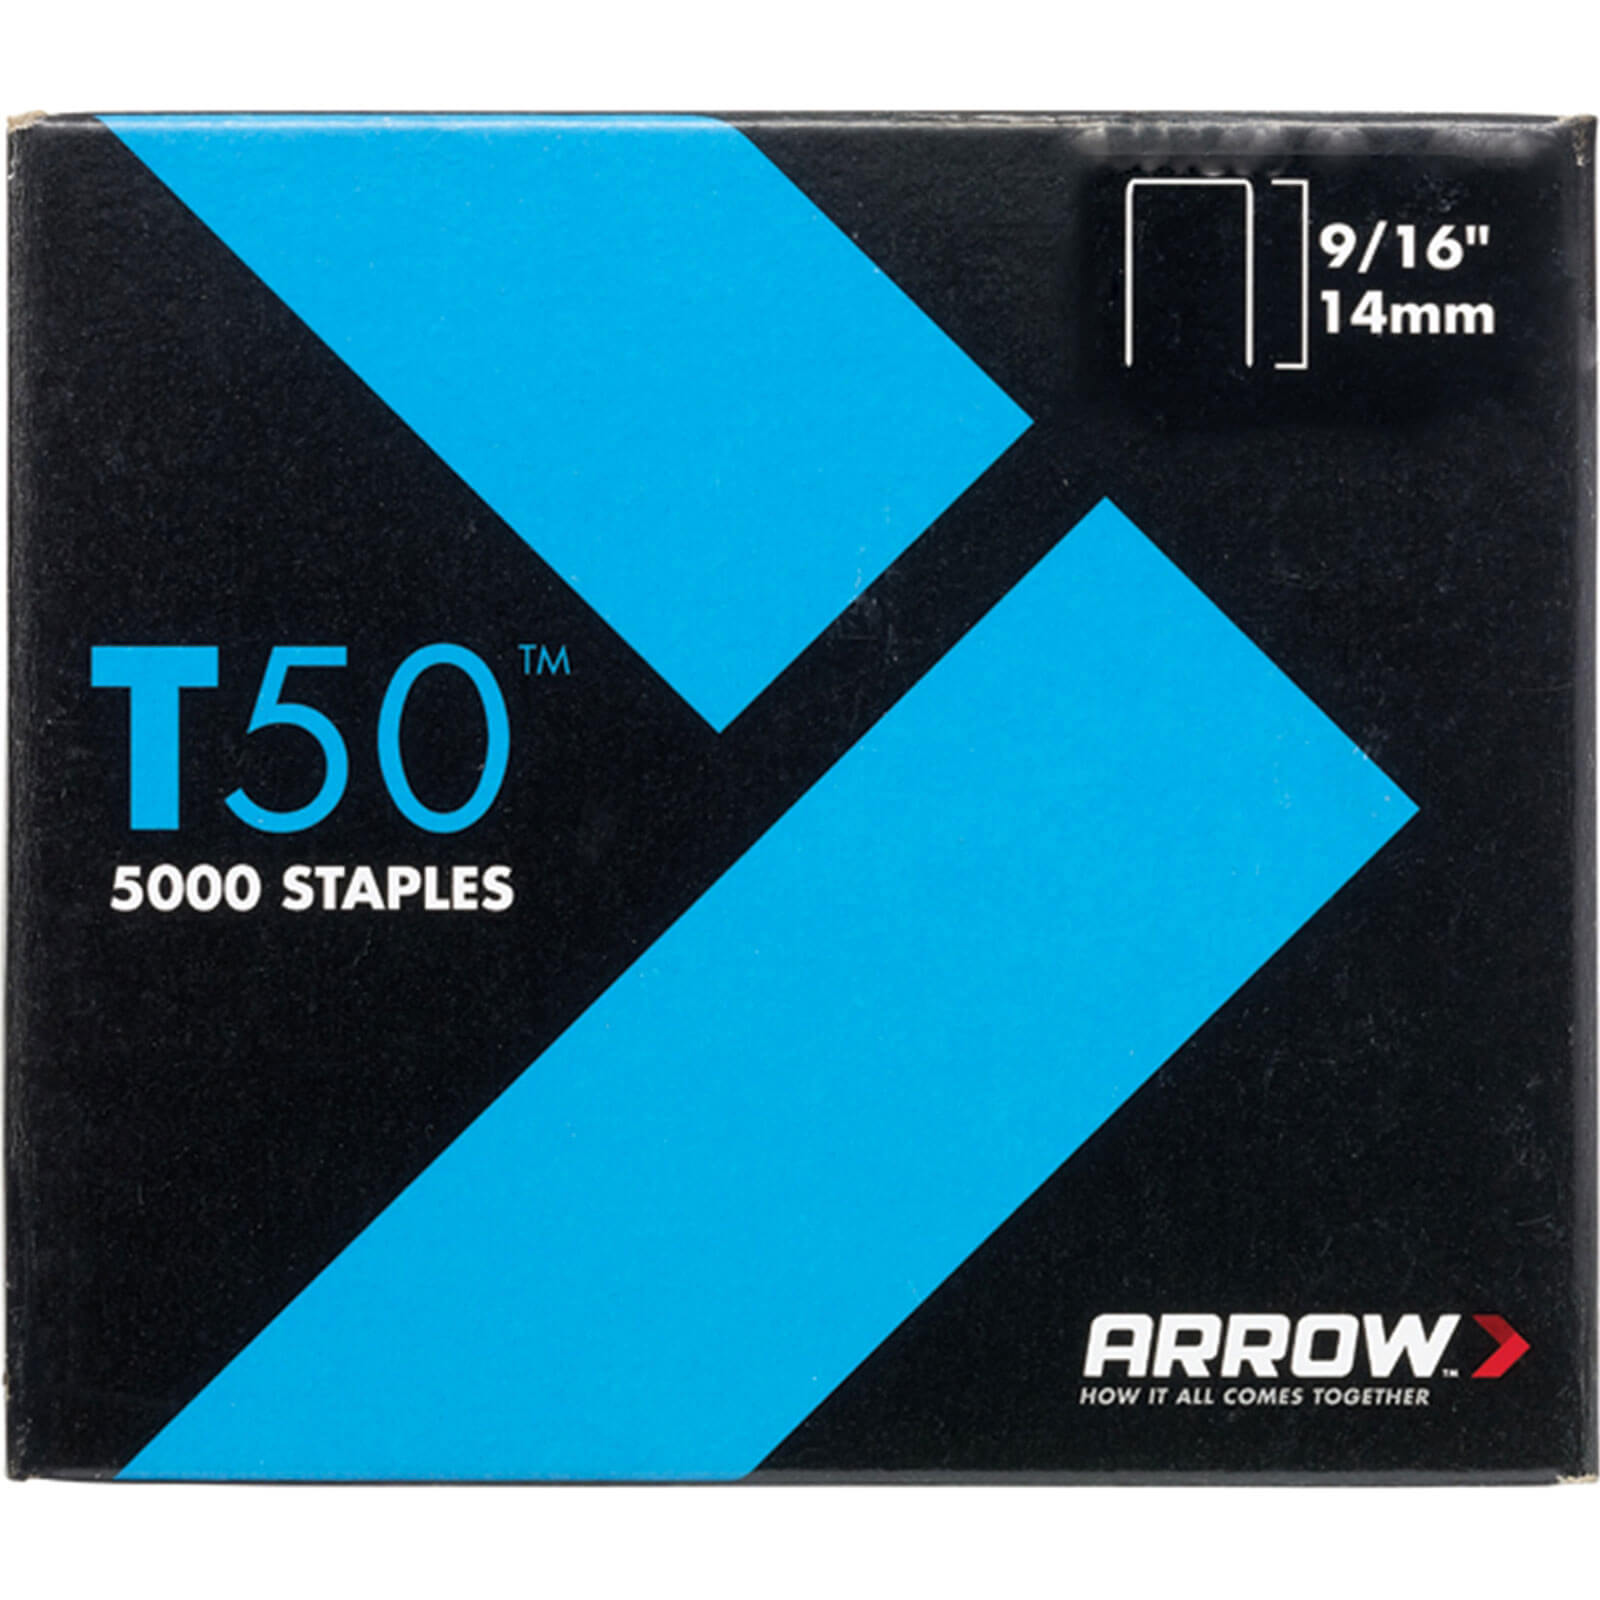 Arrow T50 Staples 14mm / 9/16" Pack of 1250